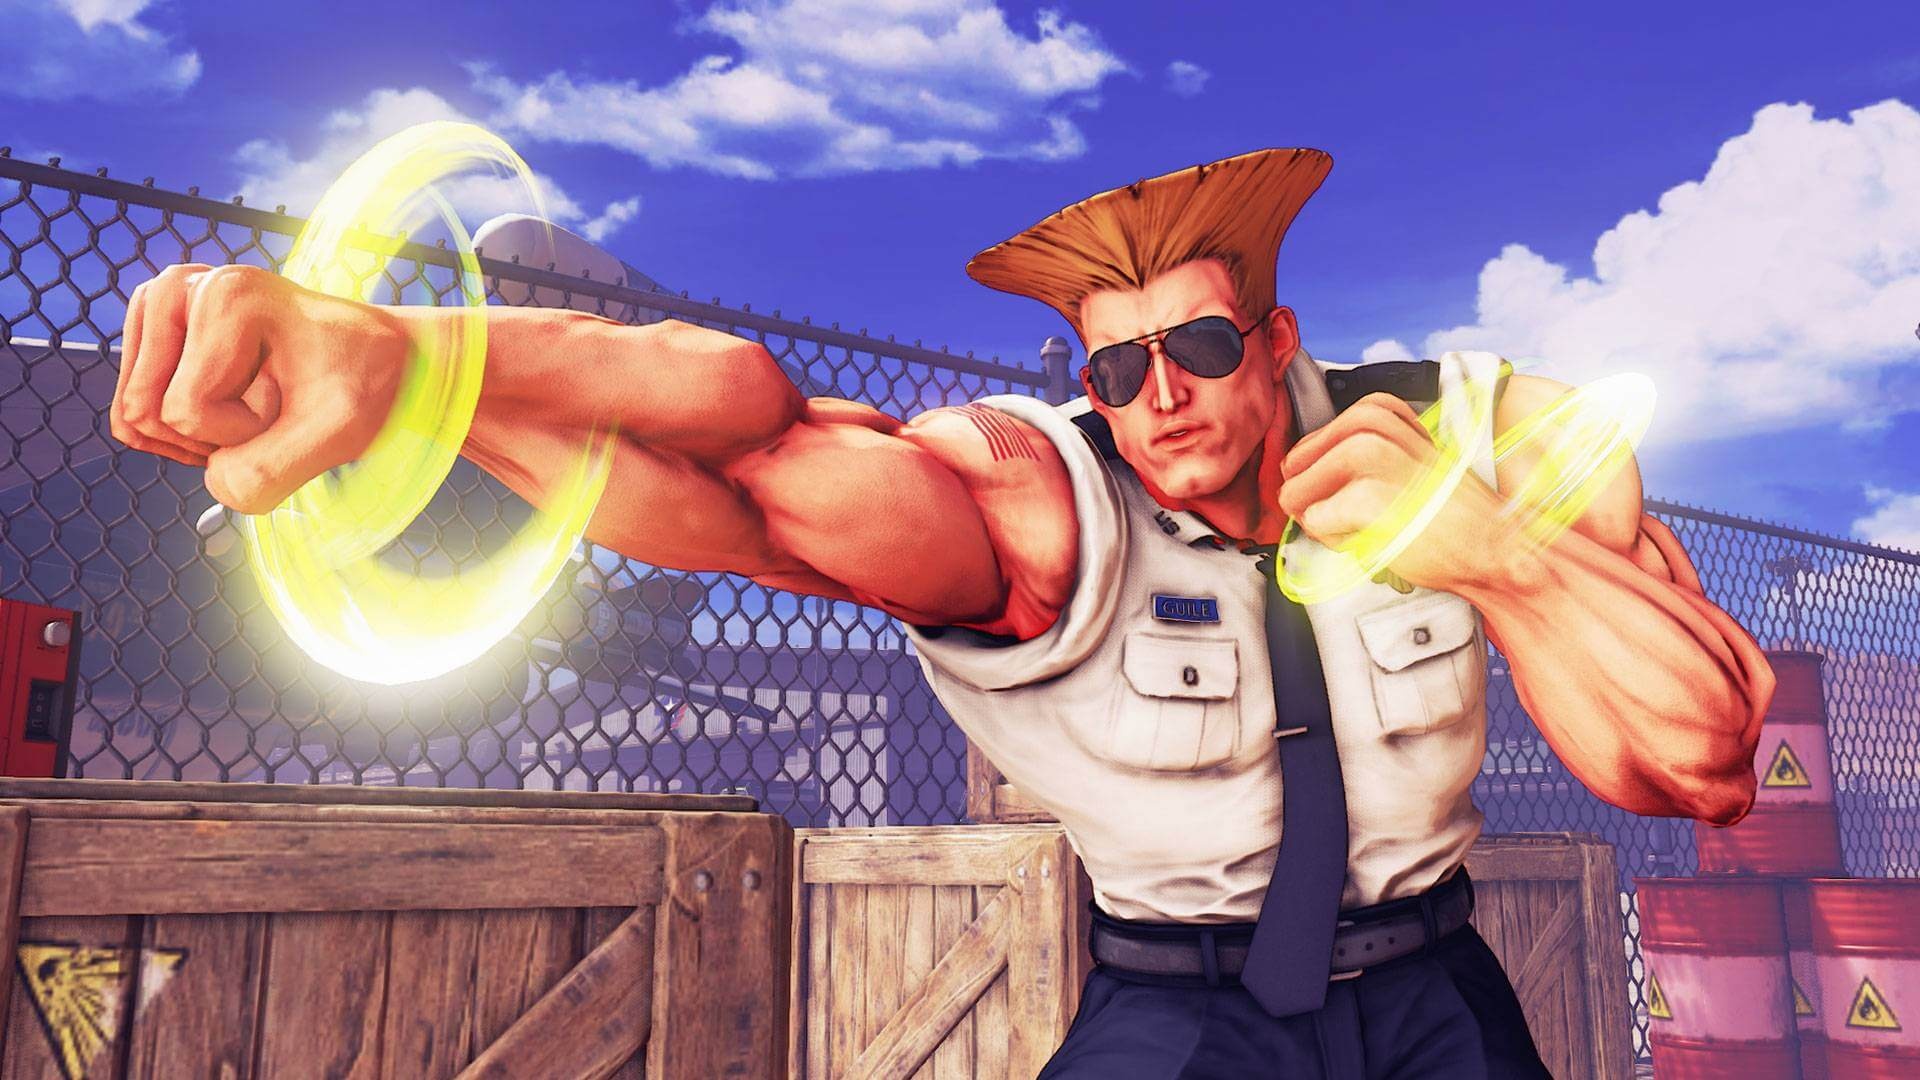 Guile in Street Fighter 5, How to play Guile, Move guide, Dashfight, 1920x1080 Full HD Desktop